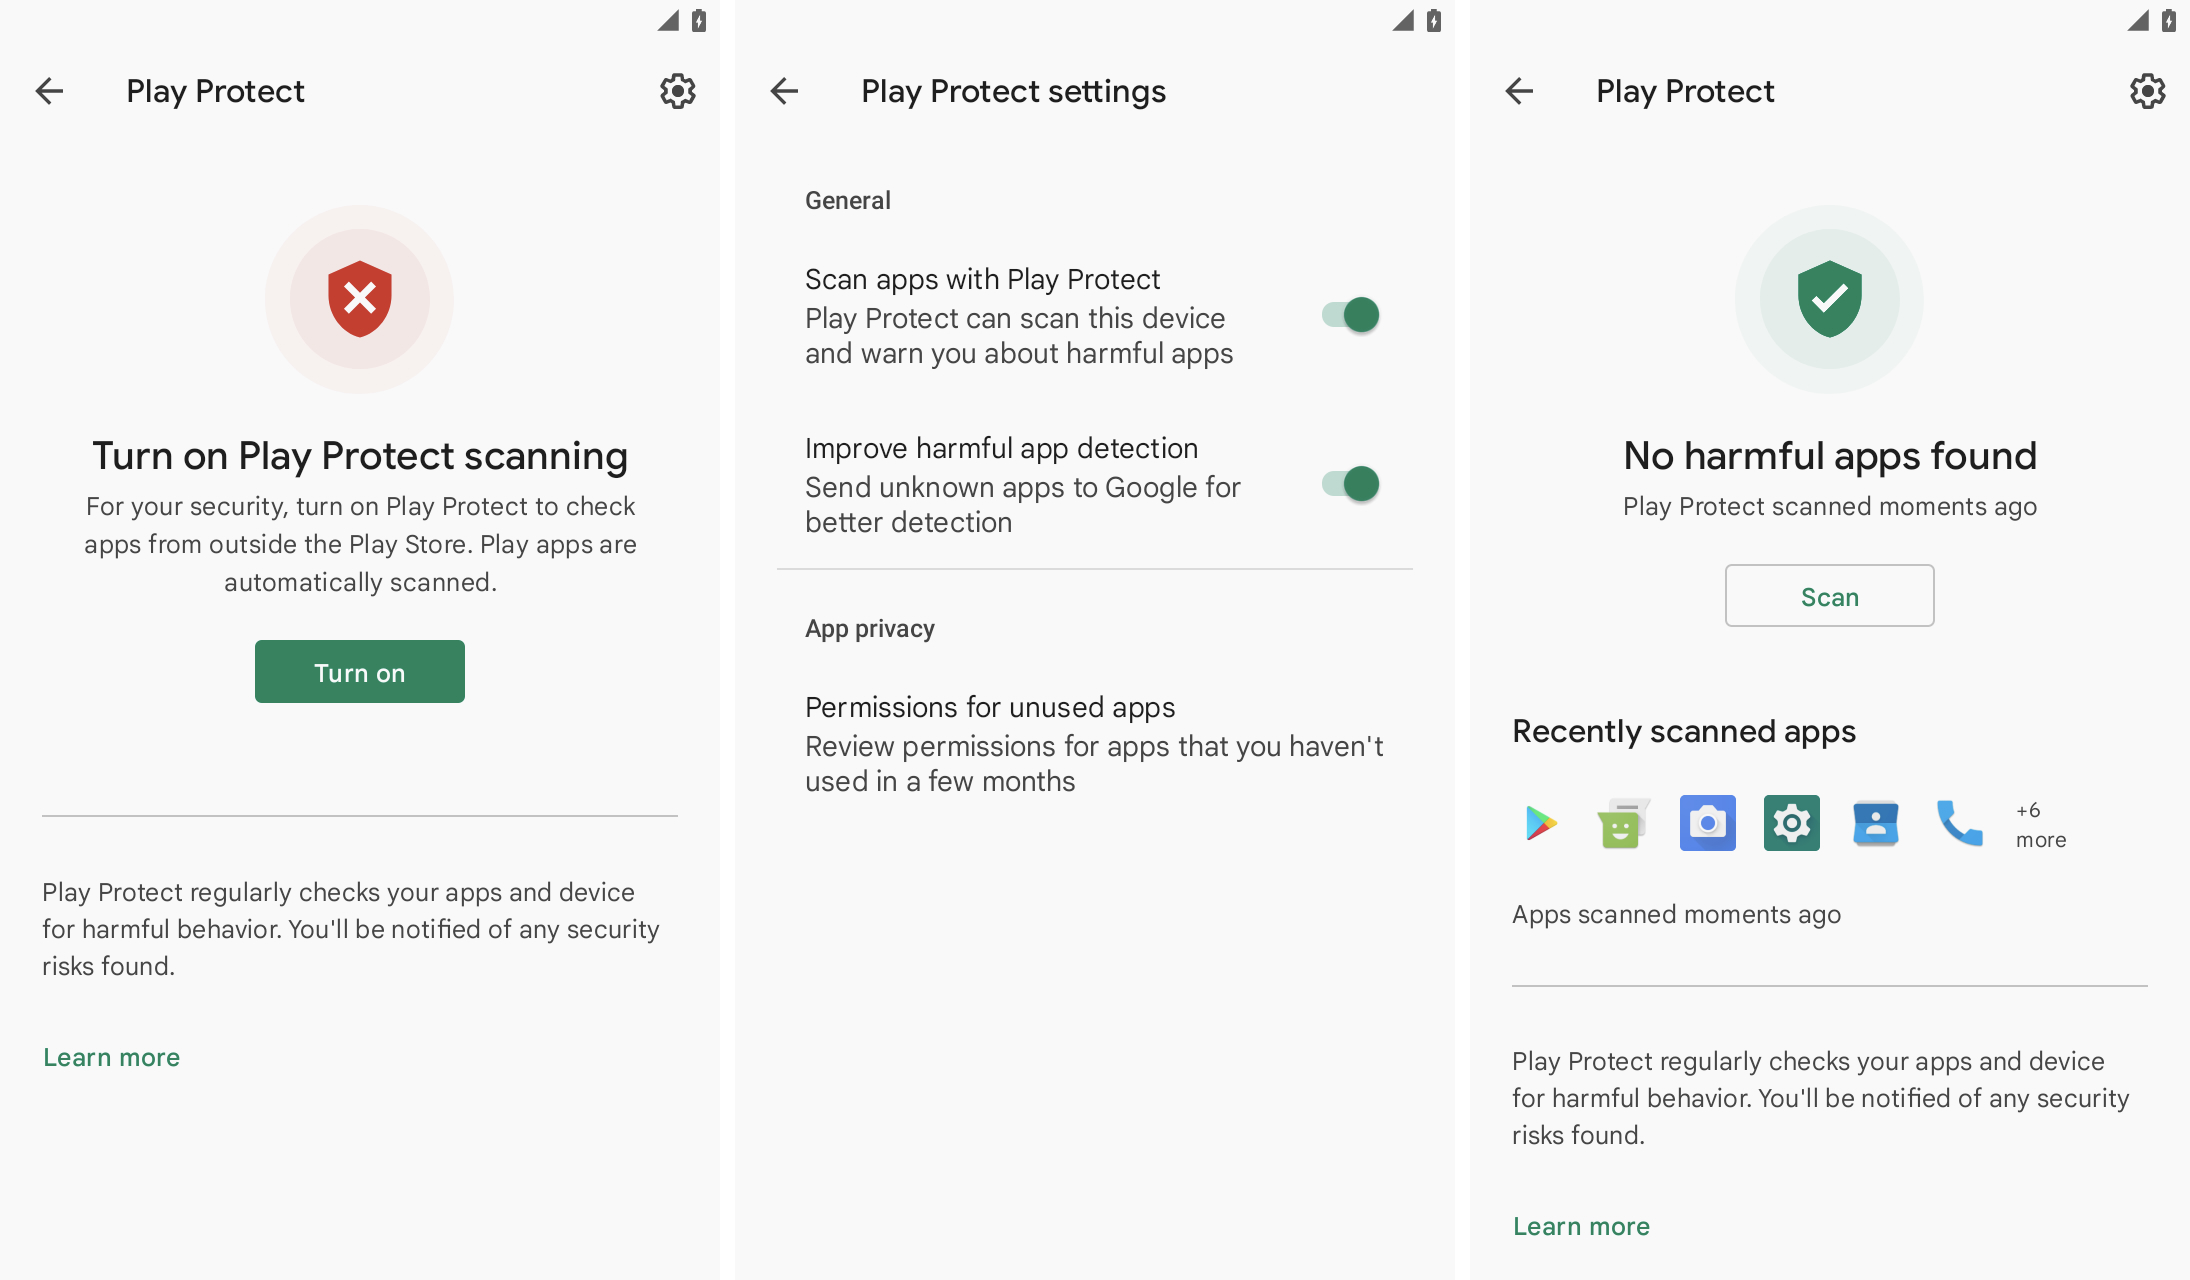 Three screenshots side-by-side showing Play Protect with scanning switched off, then the Protect Play Settings with all of the toggles switched on, and the third screenshot showing Google Play Protect enabled and showing "No harmful apps found," featuring a "scan" button to check for potentially malicious apps.